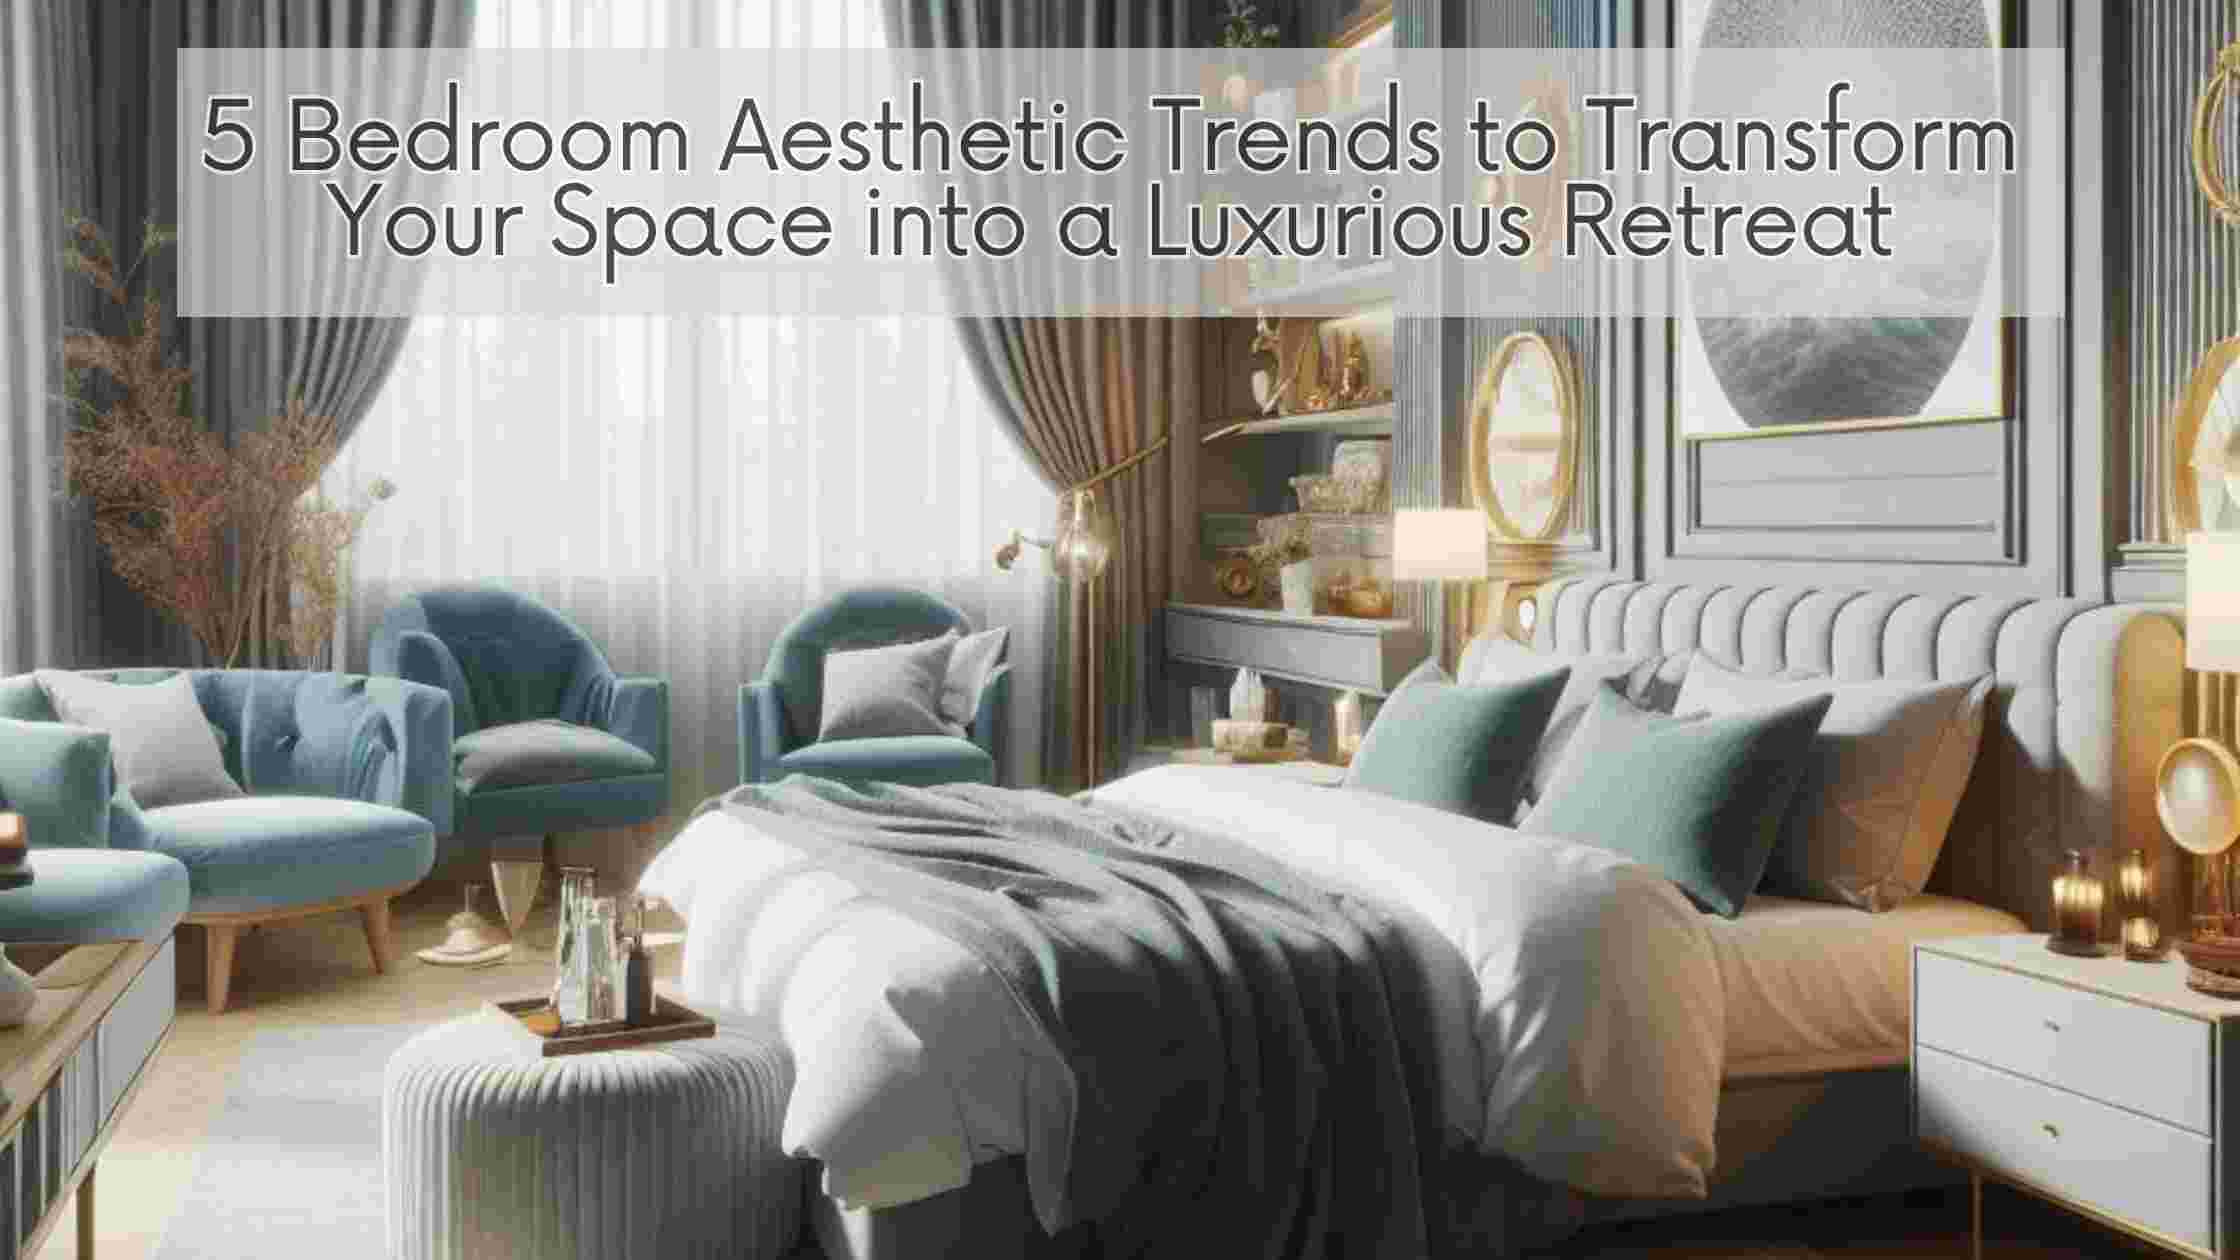 5 Bedroom Aesthetic Trends to Transform Your Space into a Luxurious Retreat